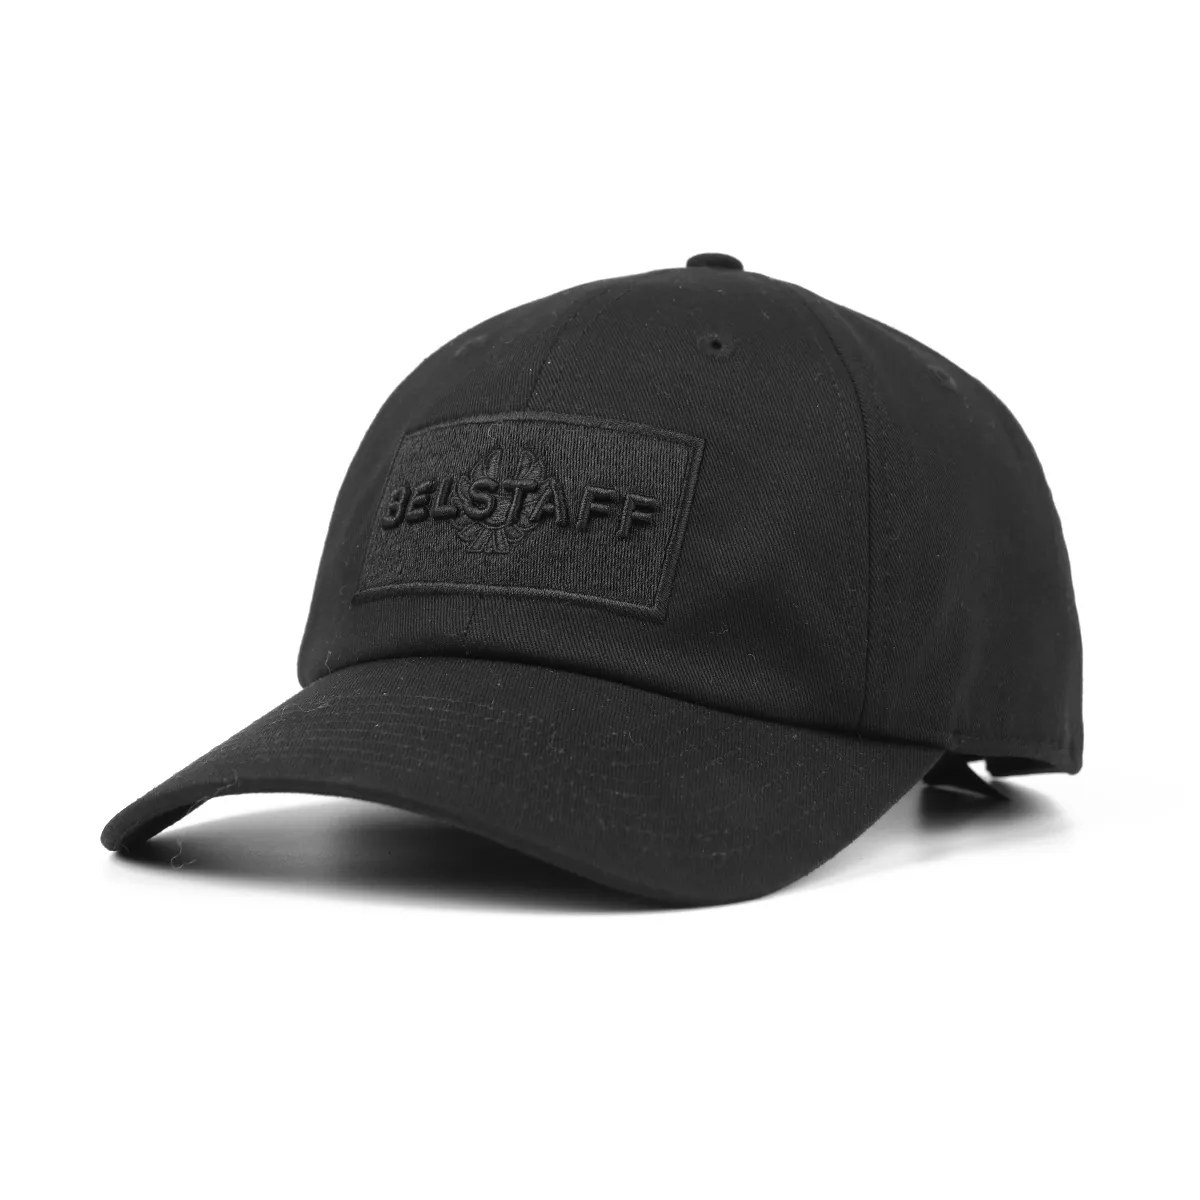 black baseball cap with embroidery patch